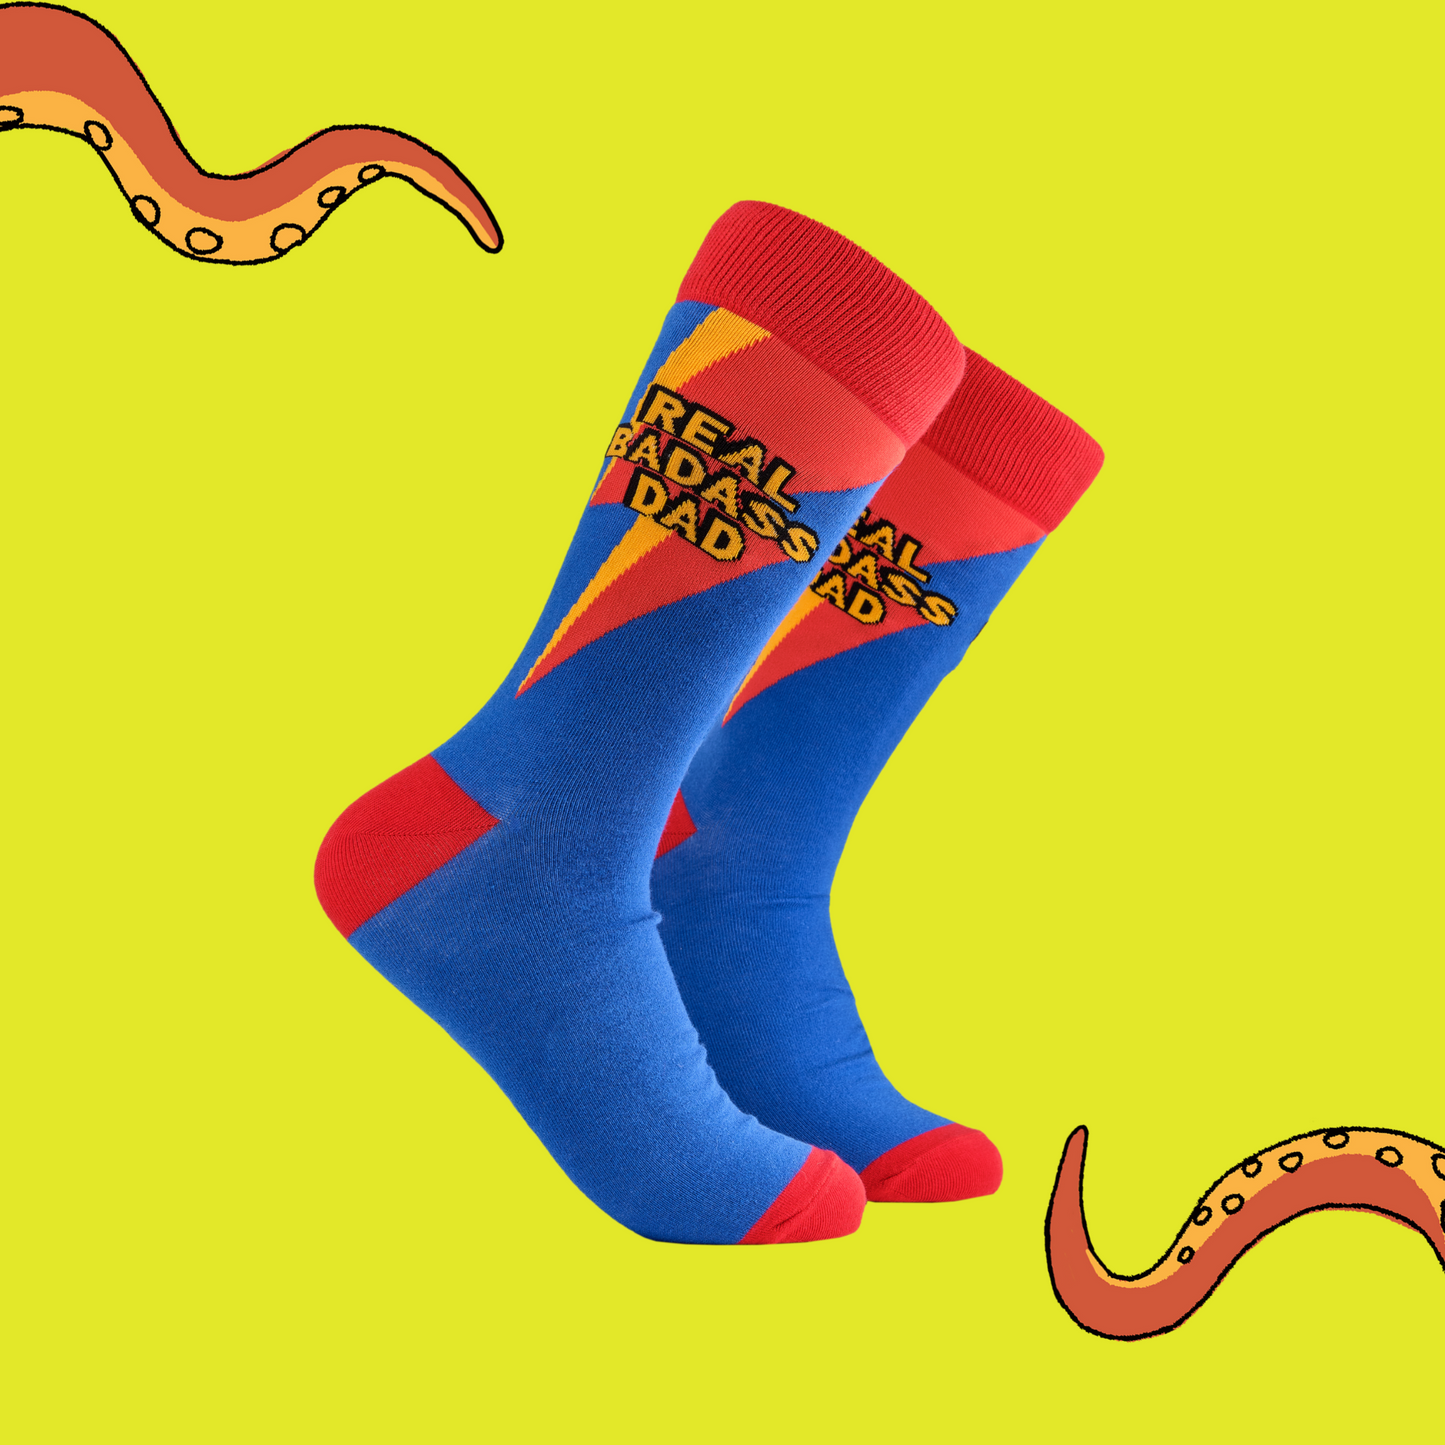 A pair of socks depicting the words Real Badass Dad. Blue legs, red cuff, heel and toe.